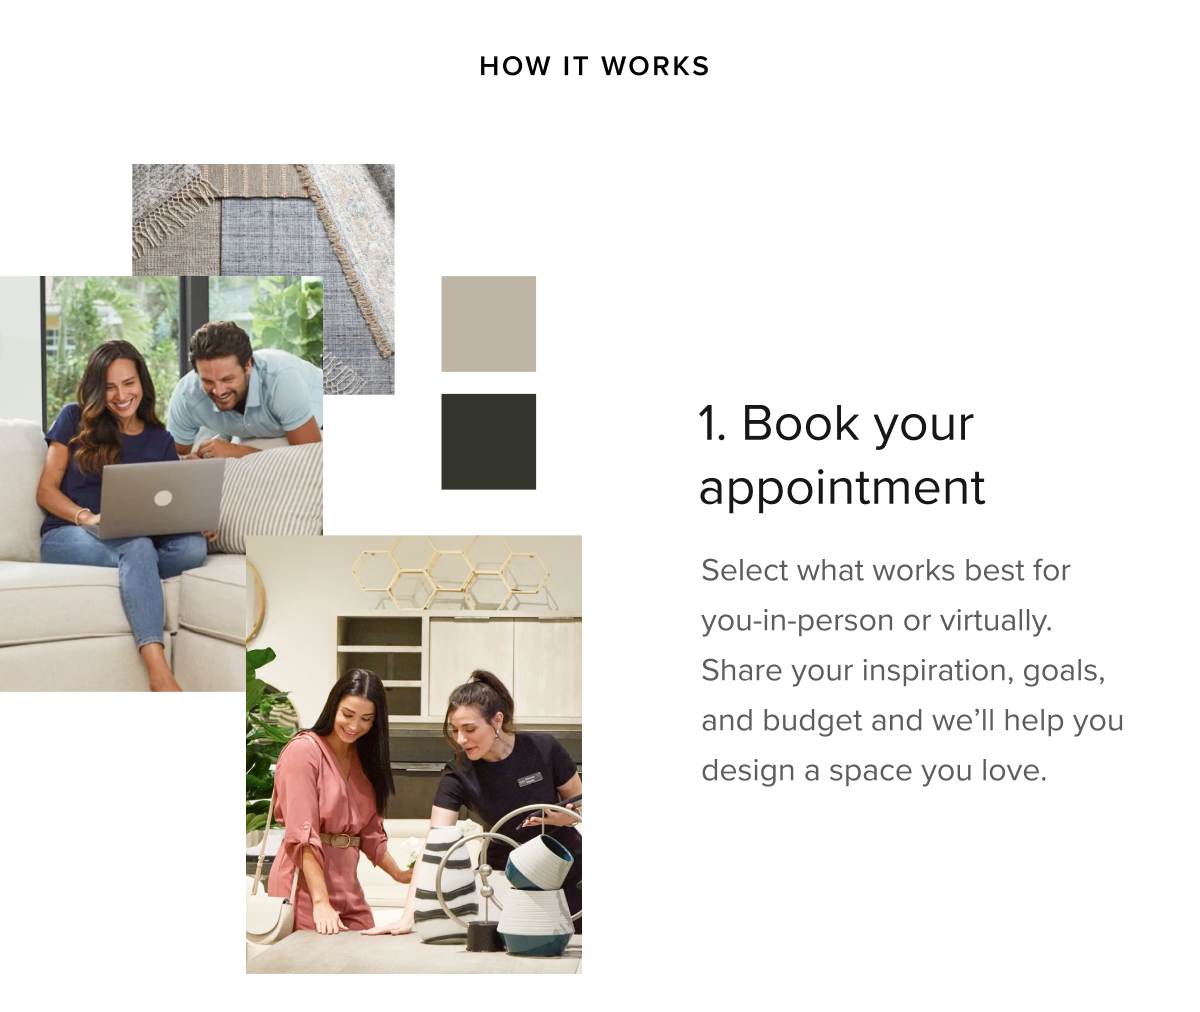 How it works. 1. Book your appointment